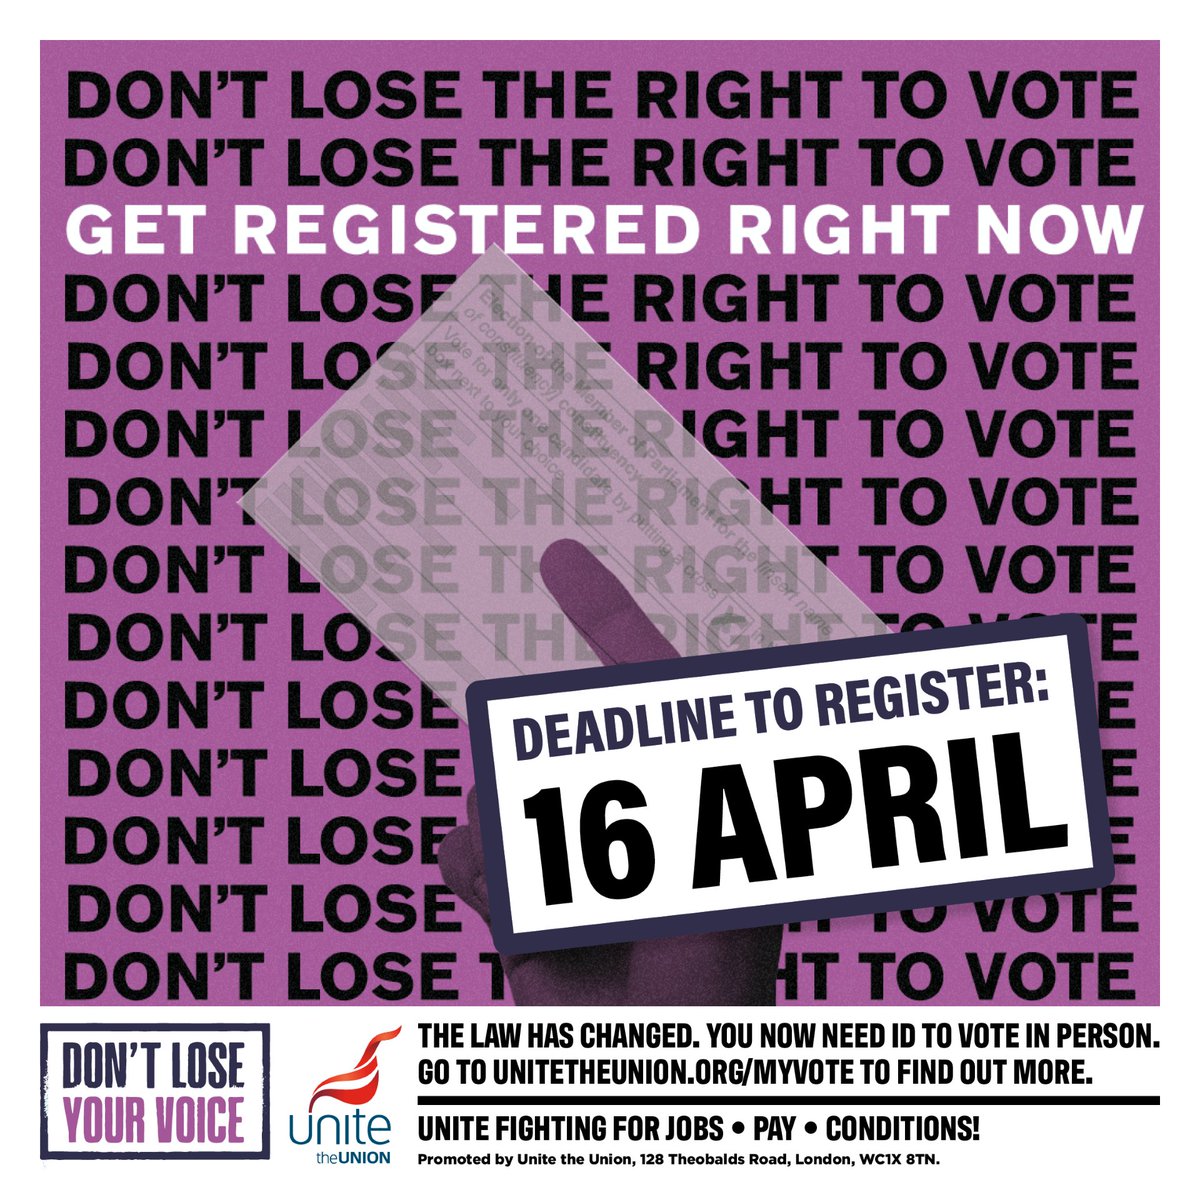 📆 It's National Voters Registration Day today 🗳️ Register to vote for the 2nd May elections in England and Wales today. The deadline to register is midnight tonight! #DontLoseYourVoice unitetheunion.org/myvote